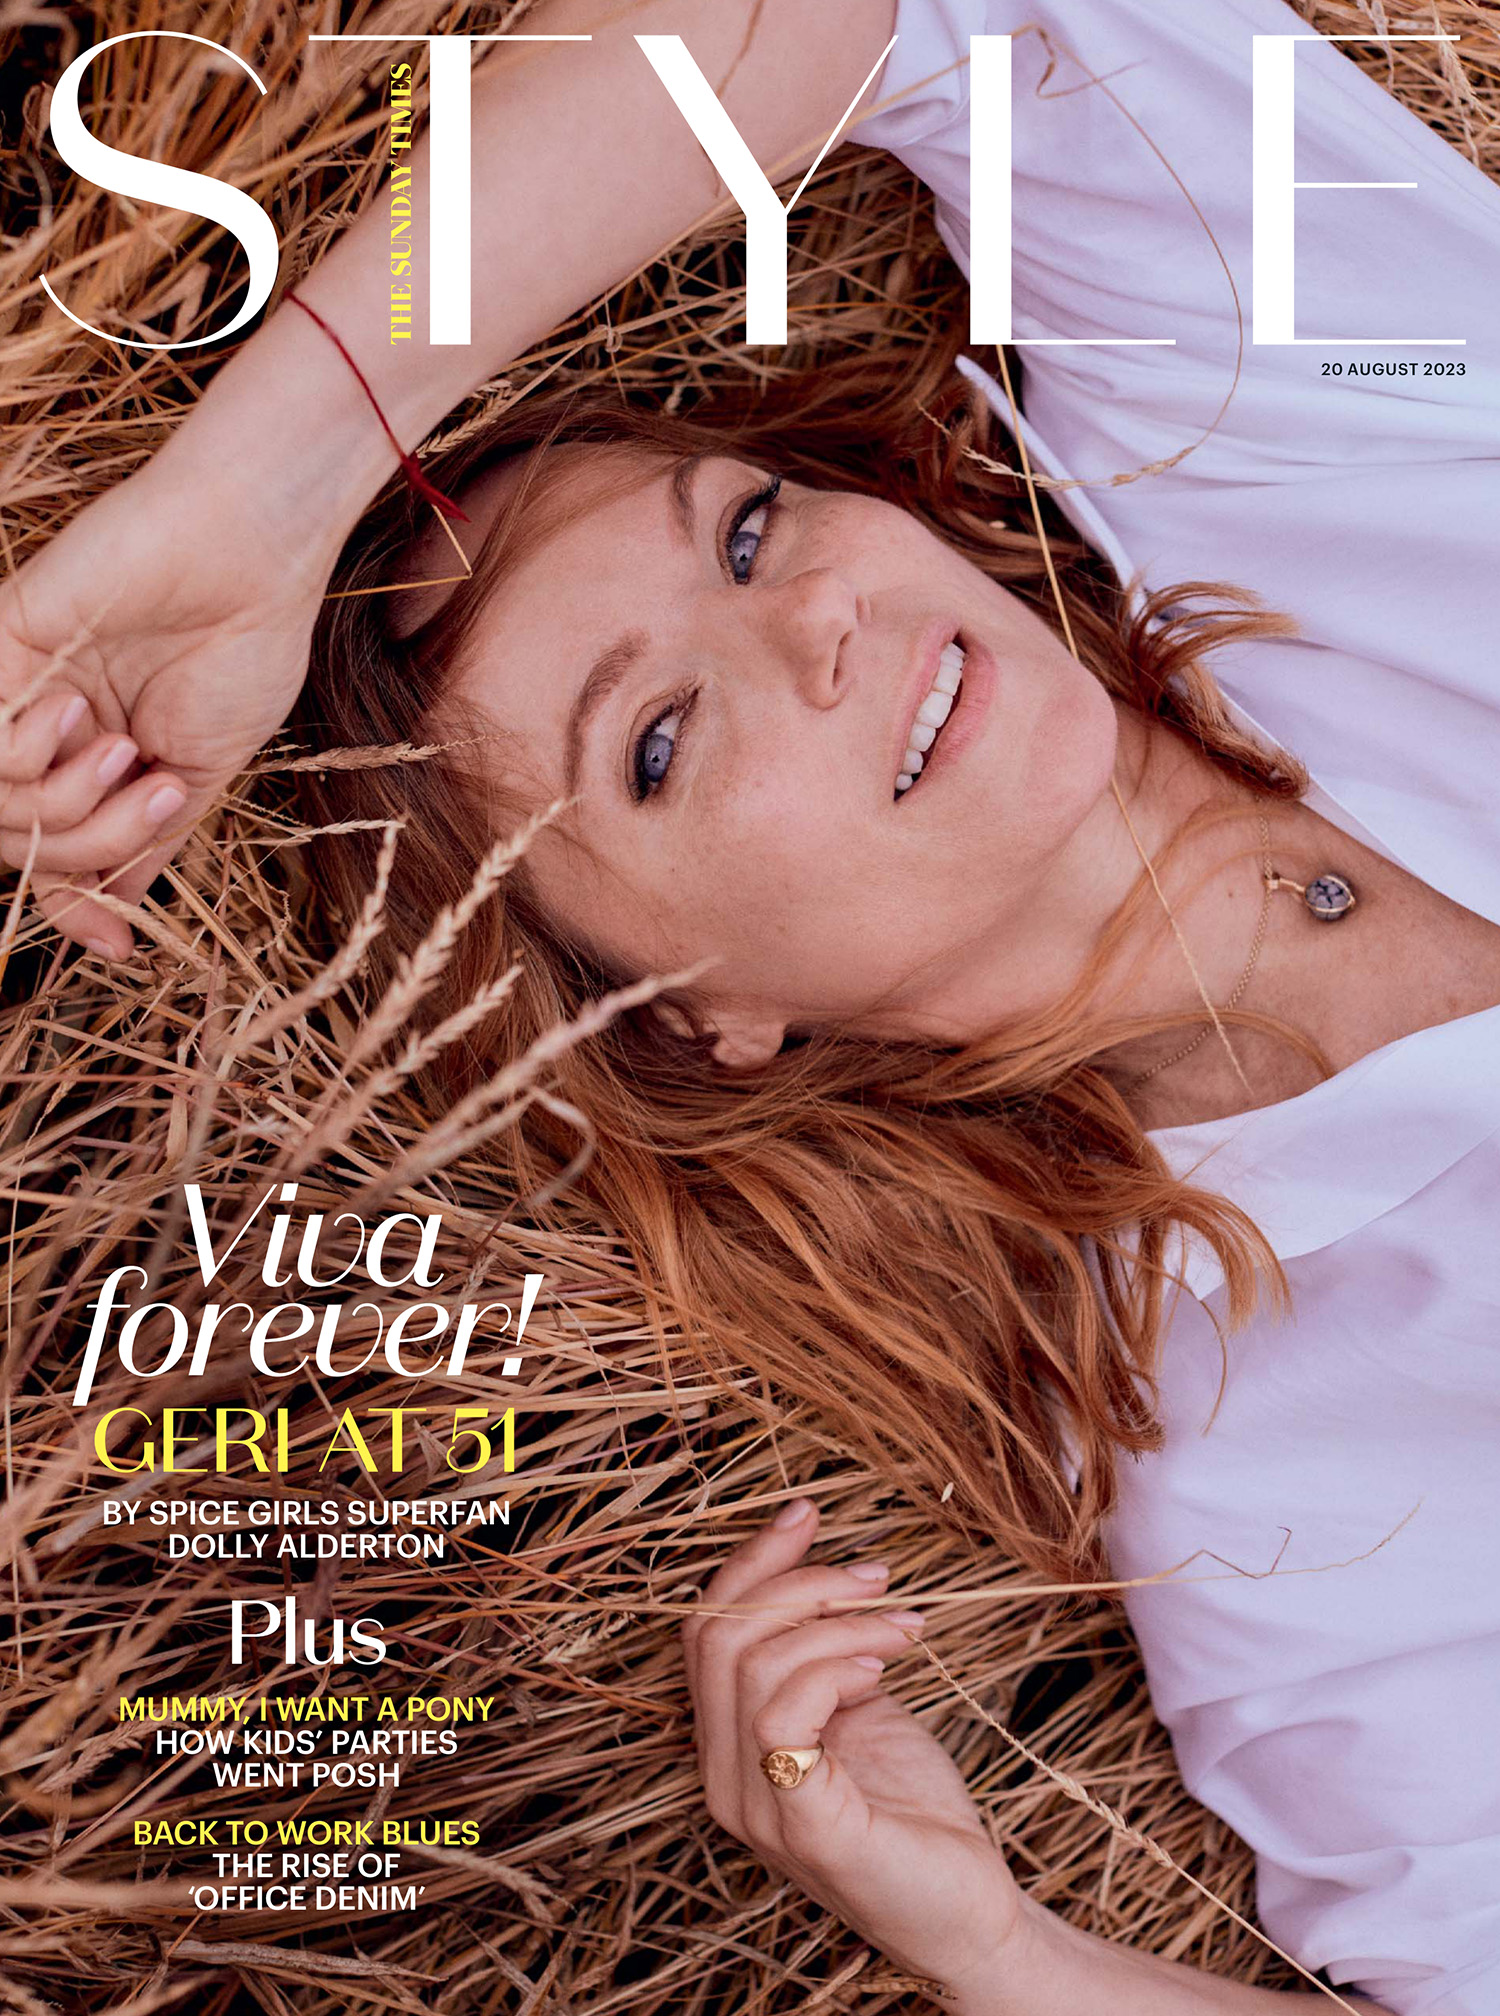 Geri Halliwell-Horner covers The Sunday Times Style August 20th, 2023 by Stefano Galuzzi